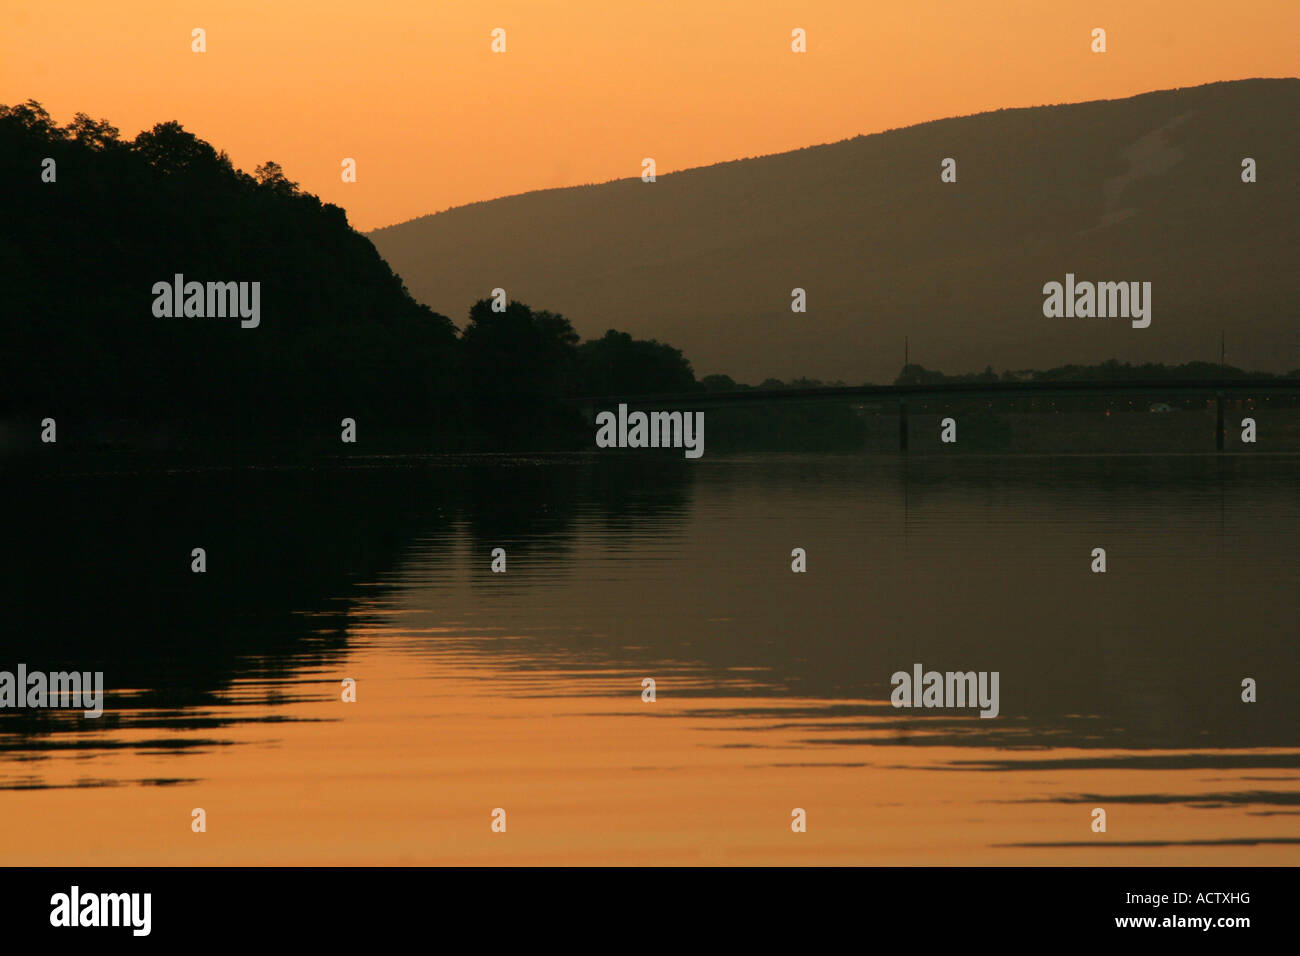 Bright orange sunrise over river with trees and hills reflecting. Stock Photo